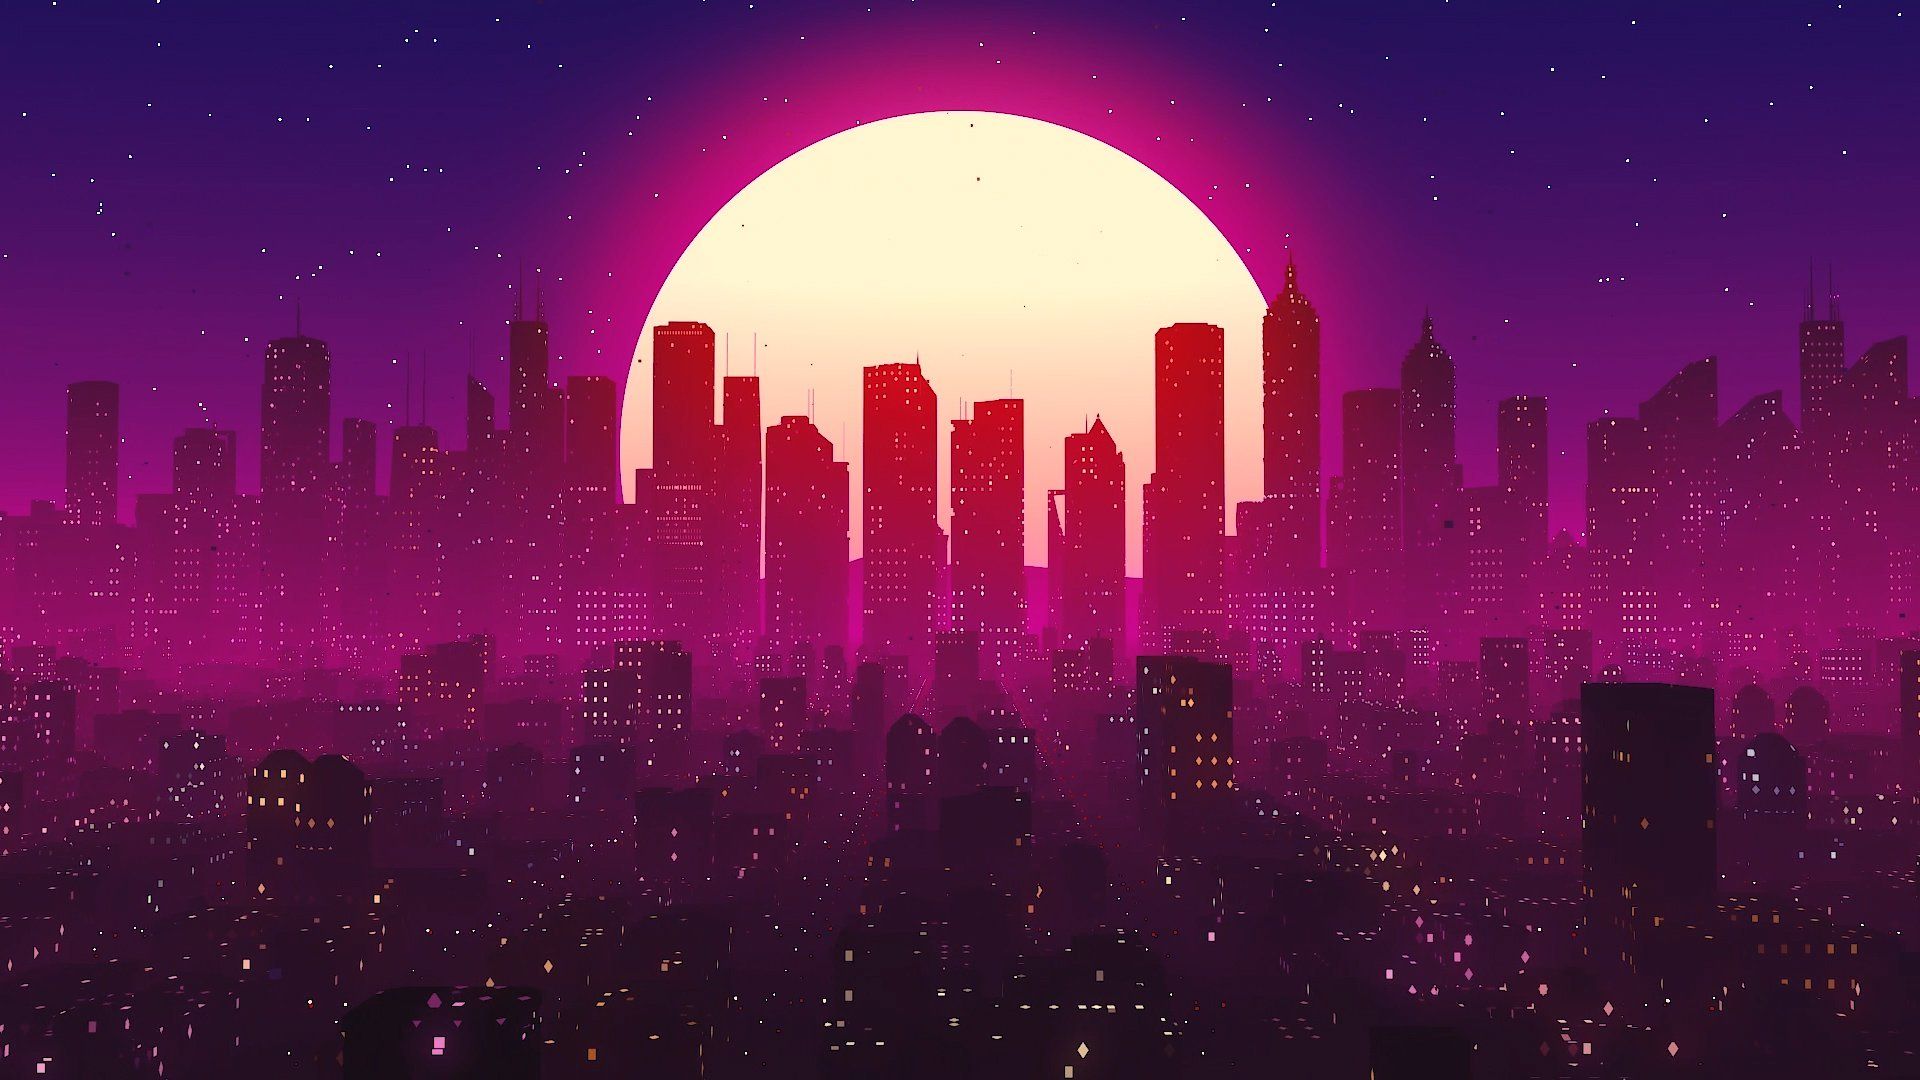 In This Class, You Will Learn How To Make A Stylish Retro City Loop Animation In Cinema 4D And After Effects. You W. Lo Fi Wallpaper, Cinema 4d, Background Image